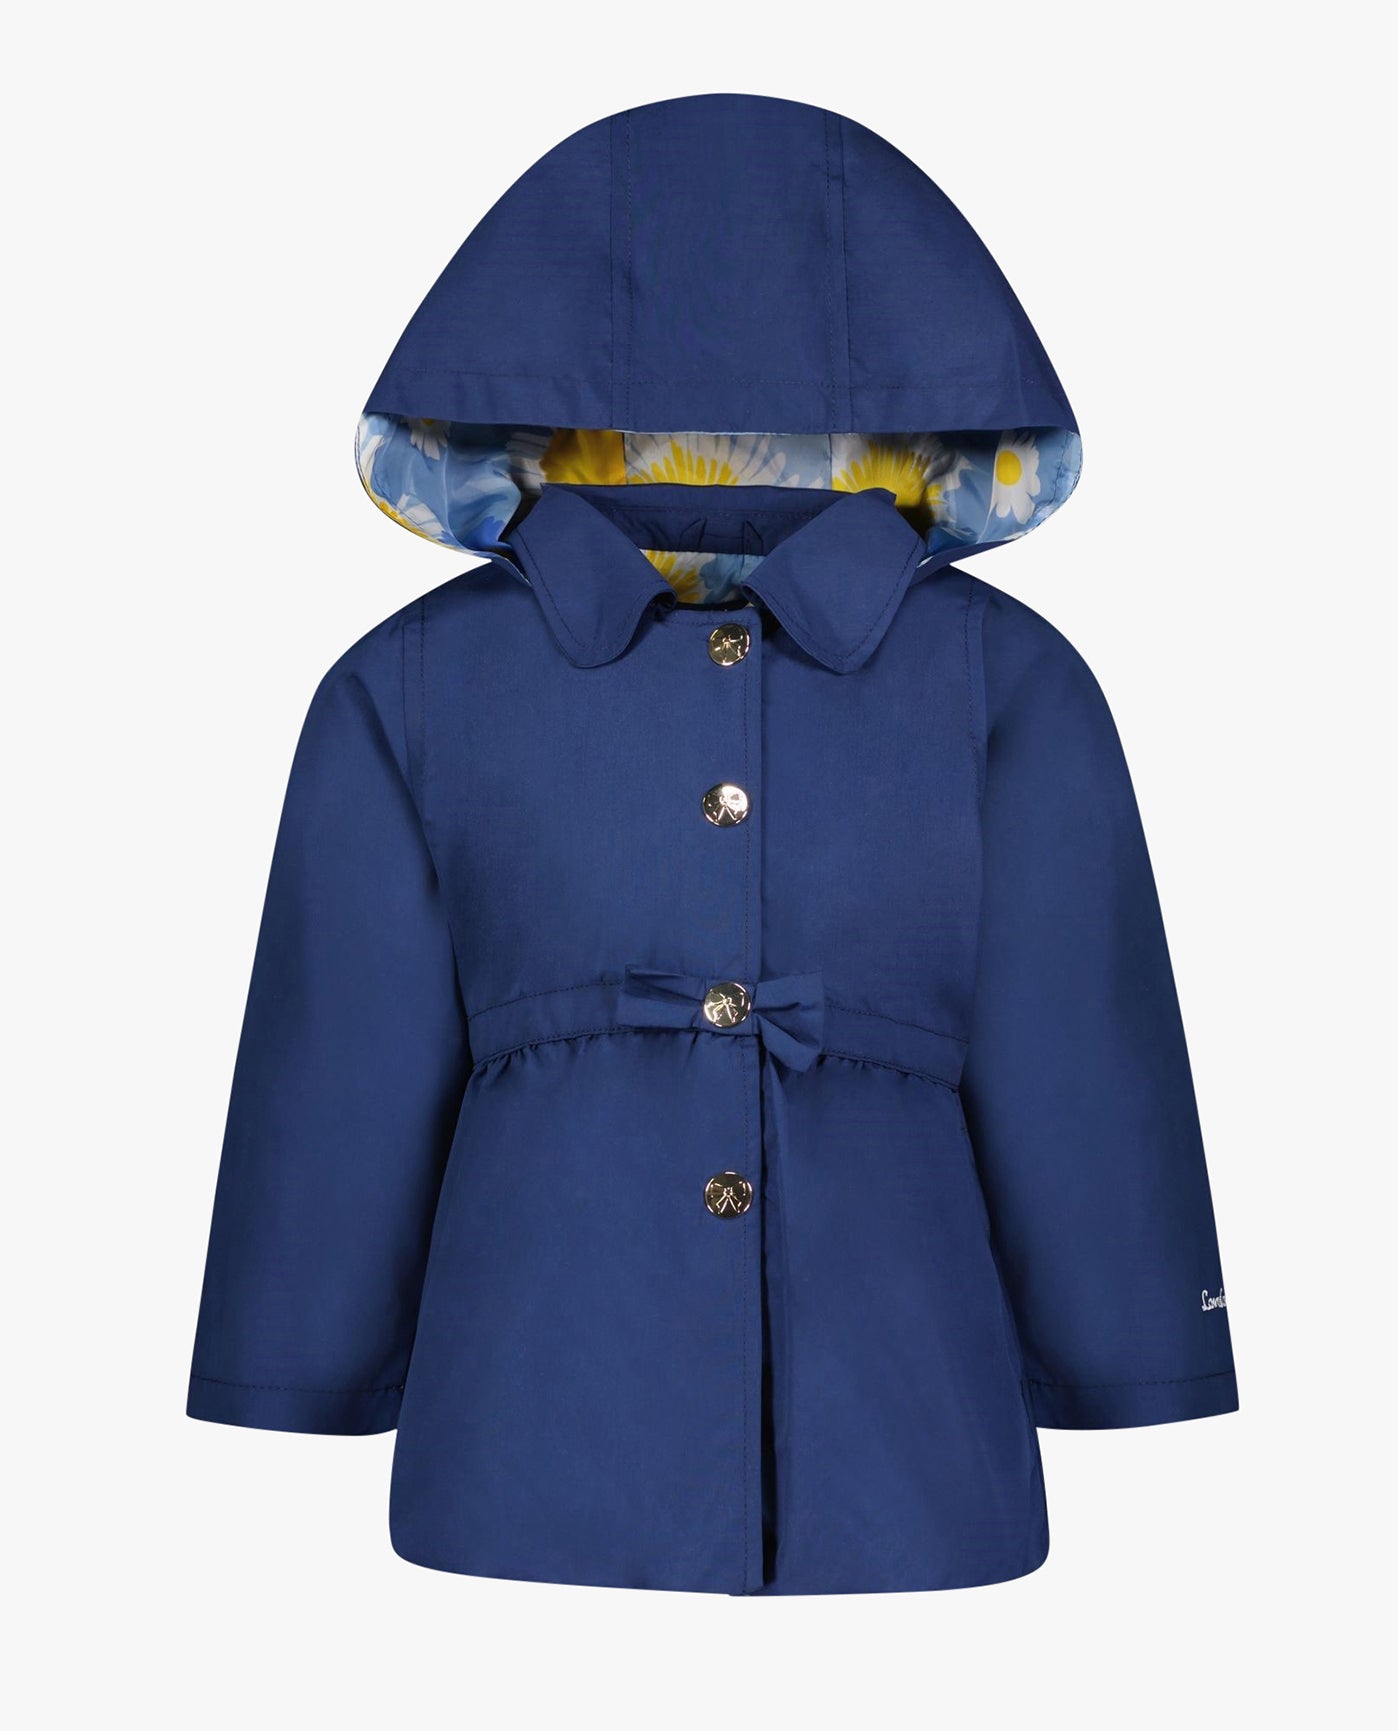 FRONT OF TODDLER GIRLS SOLID SNAP FRONT COLLARED HOODED RAINCOAT WITH BOW | NAVY